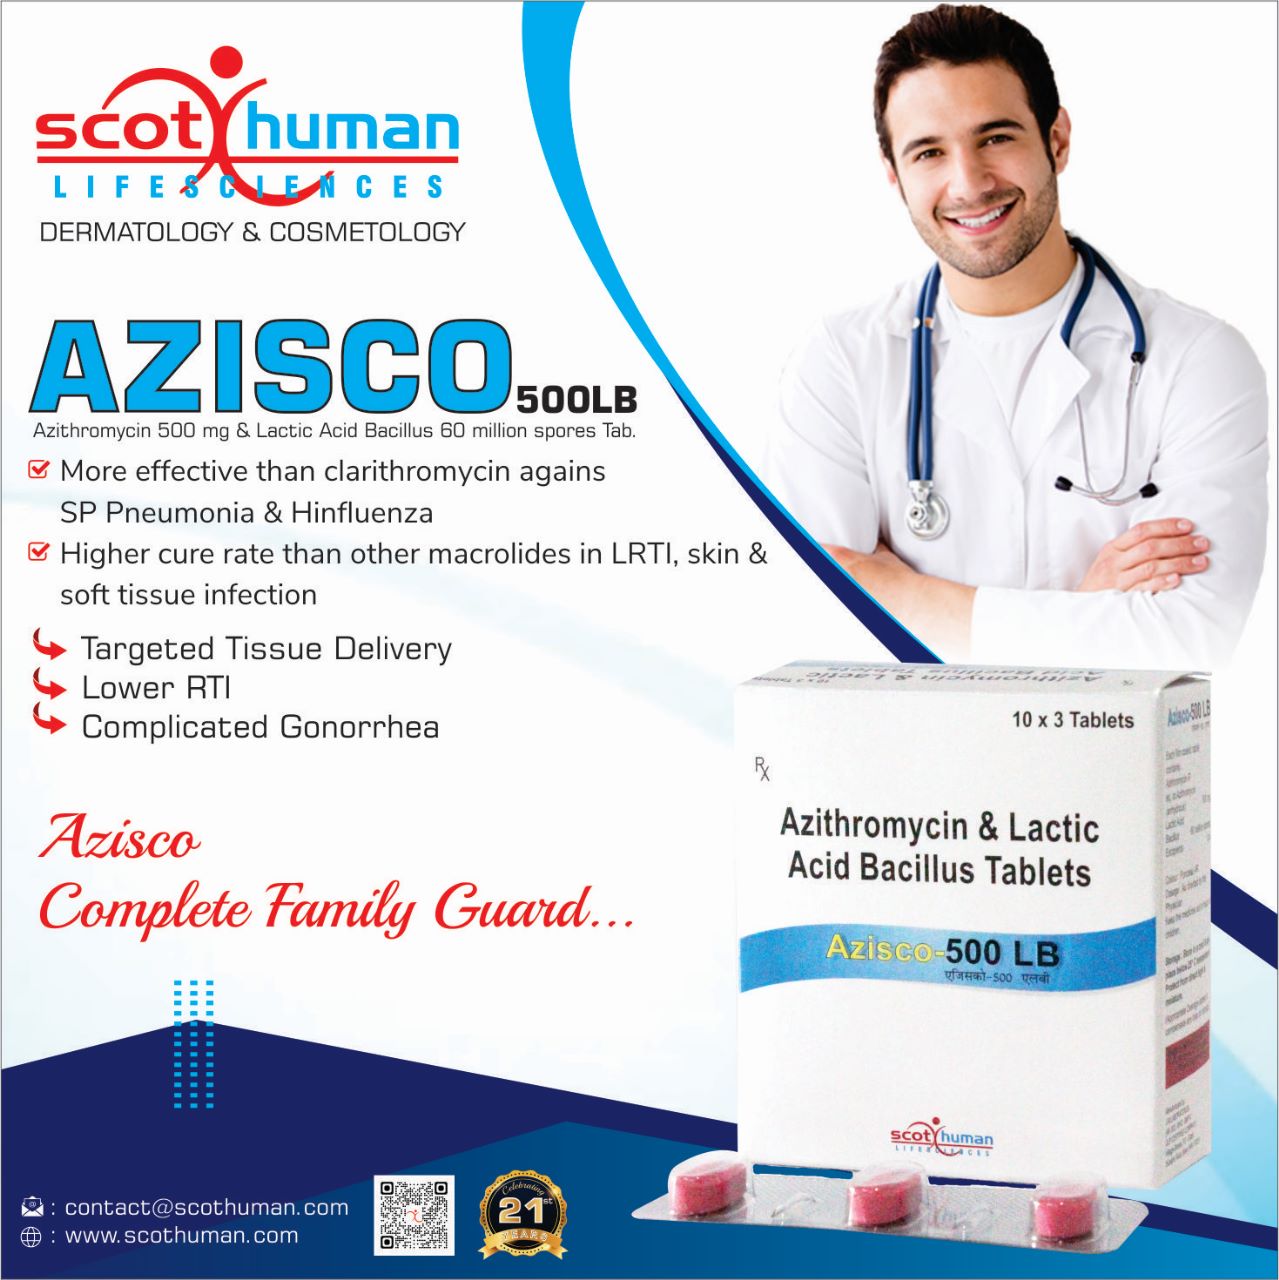 Product Name: Azisco, Compositions of Azisco are Azithromycin & Lactic Acid Tablets - Pharma Drugs and Chemicals